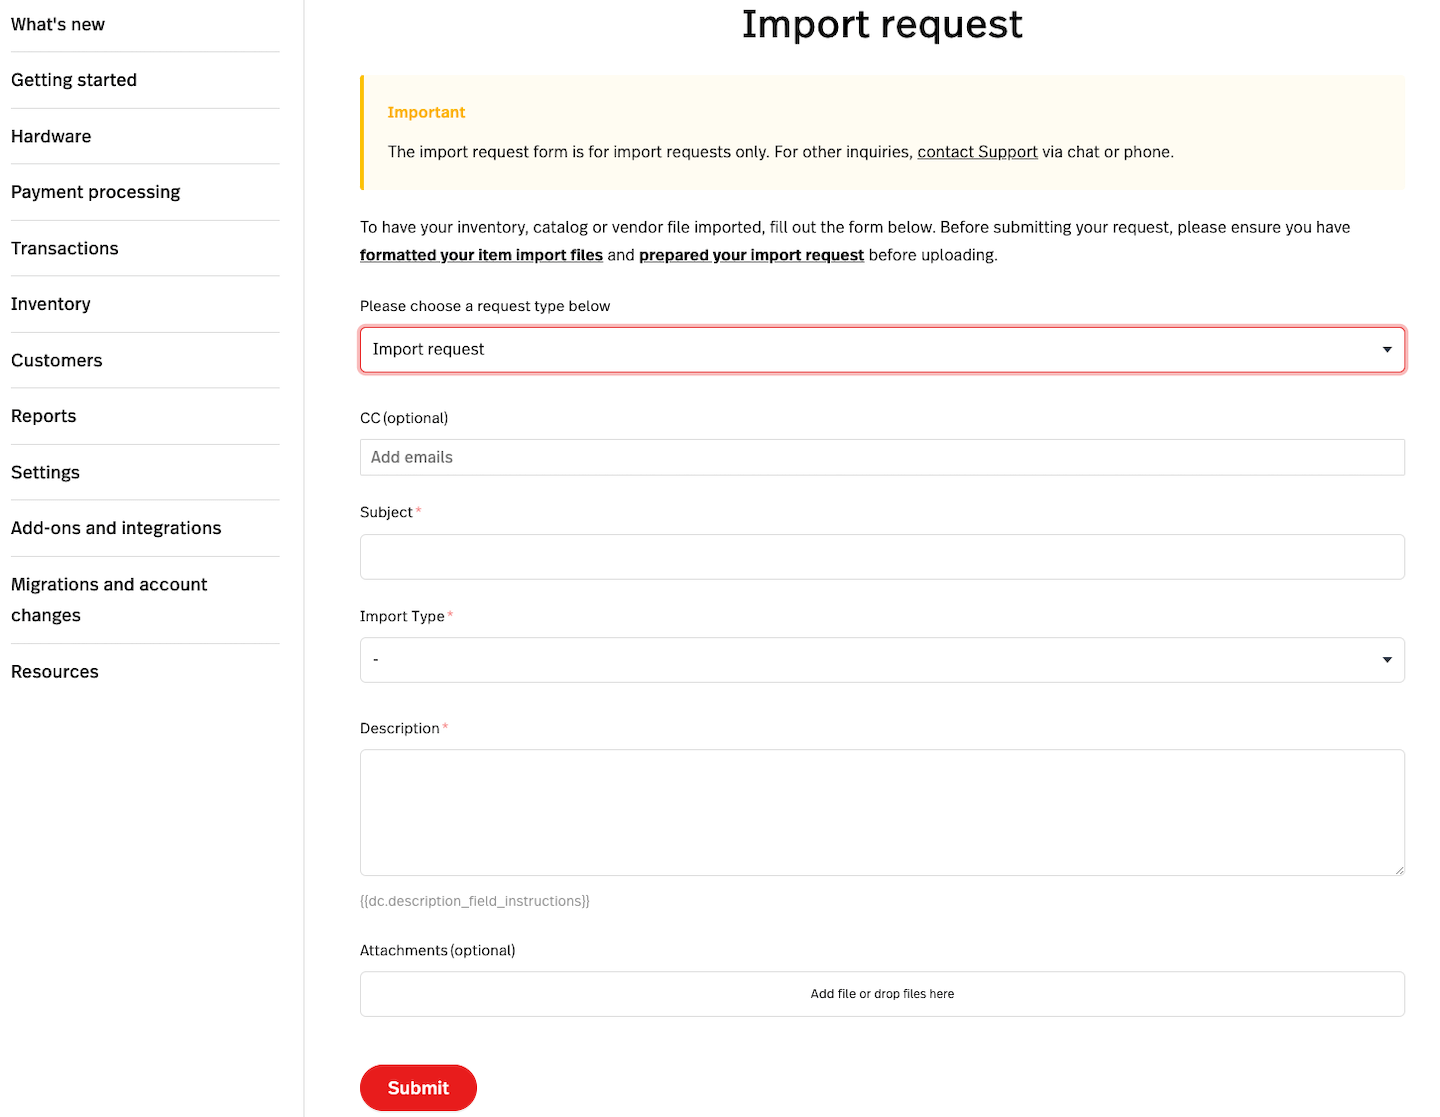 Import request form with areas to fill in CC, Subject, Import Type, Description, and add Attachment(s).